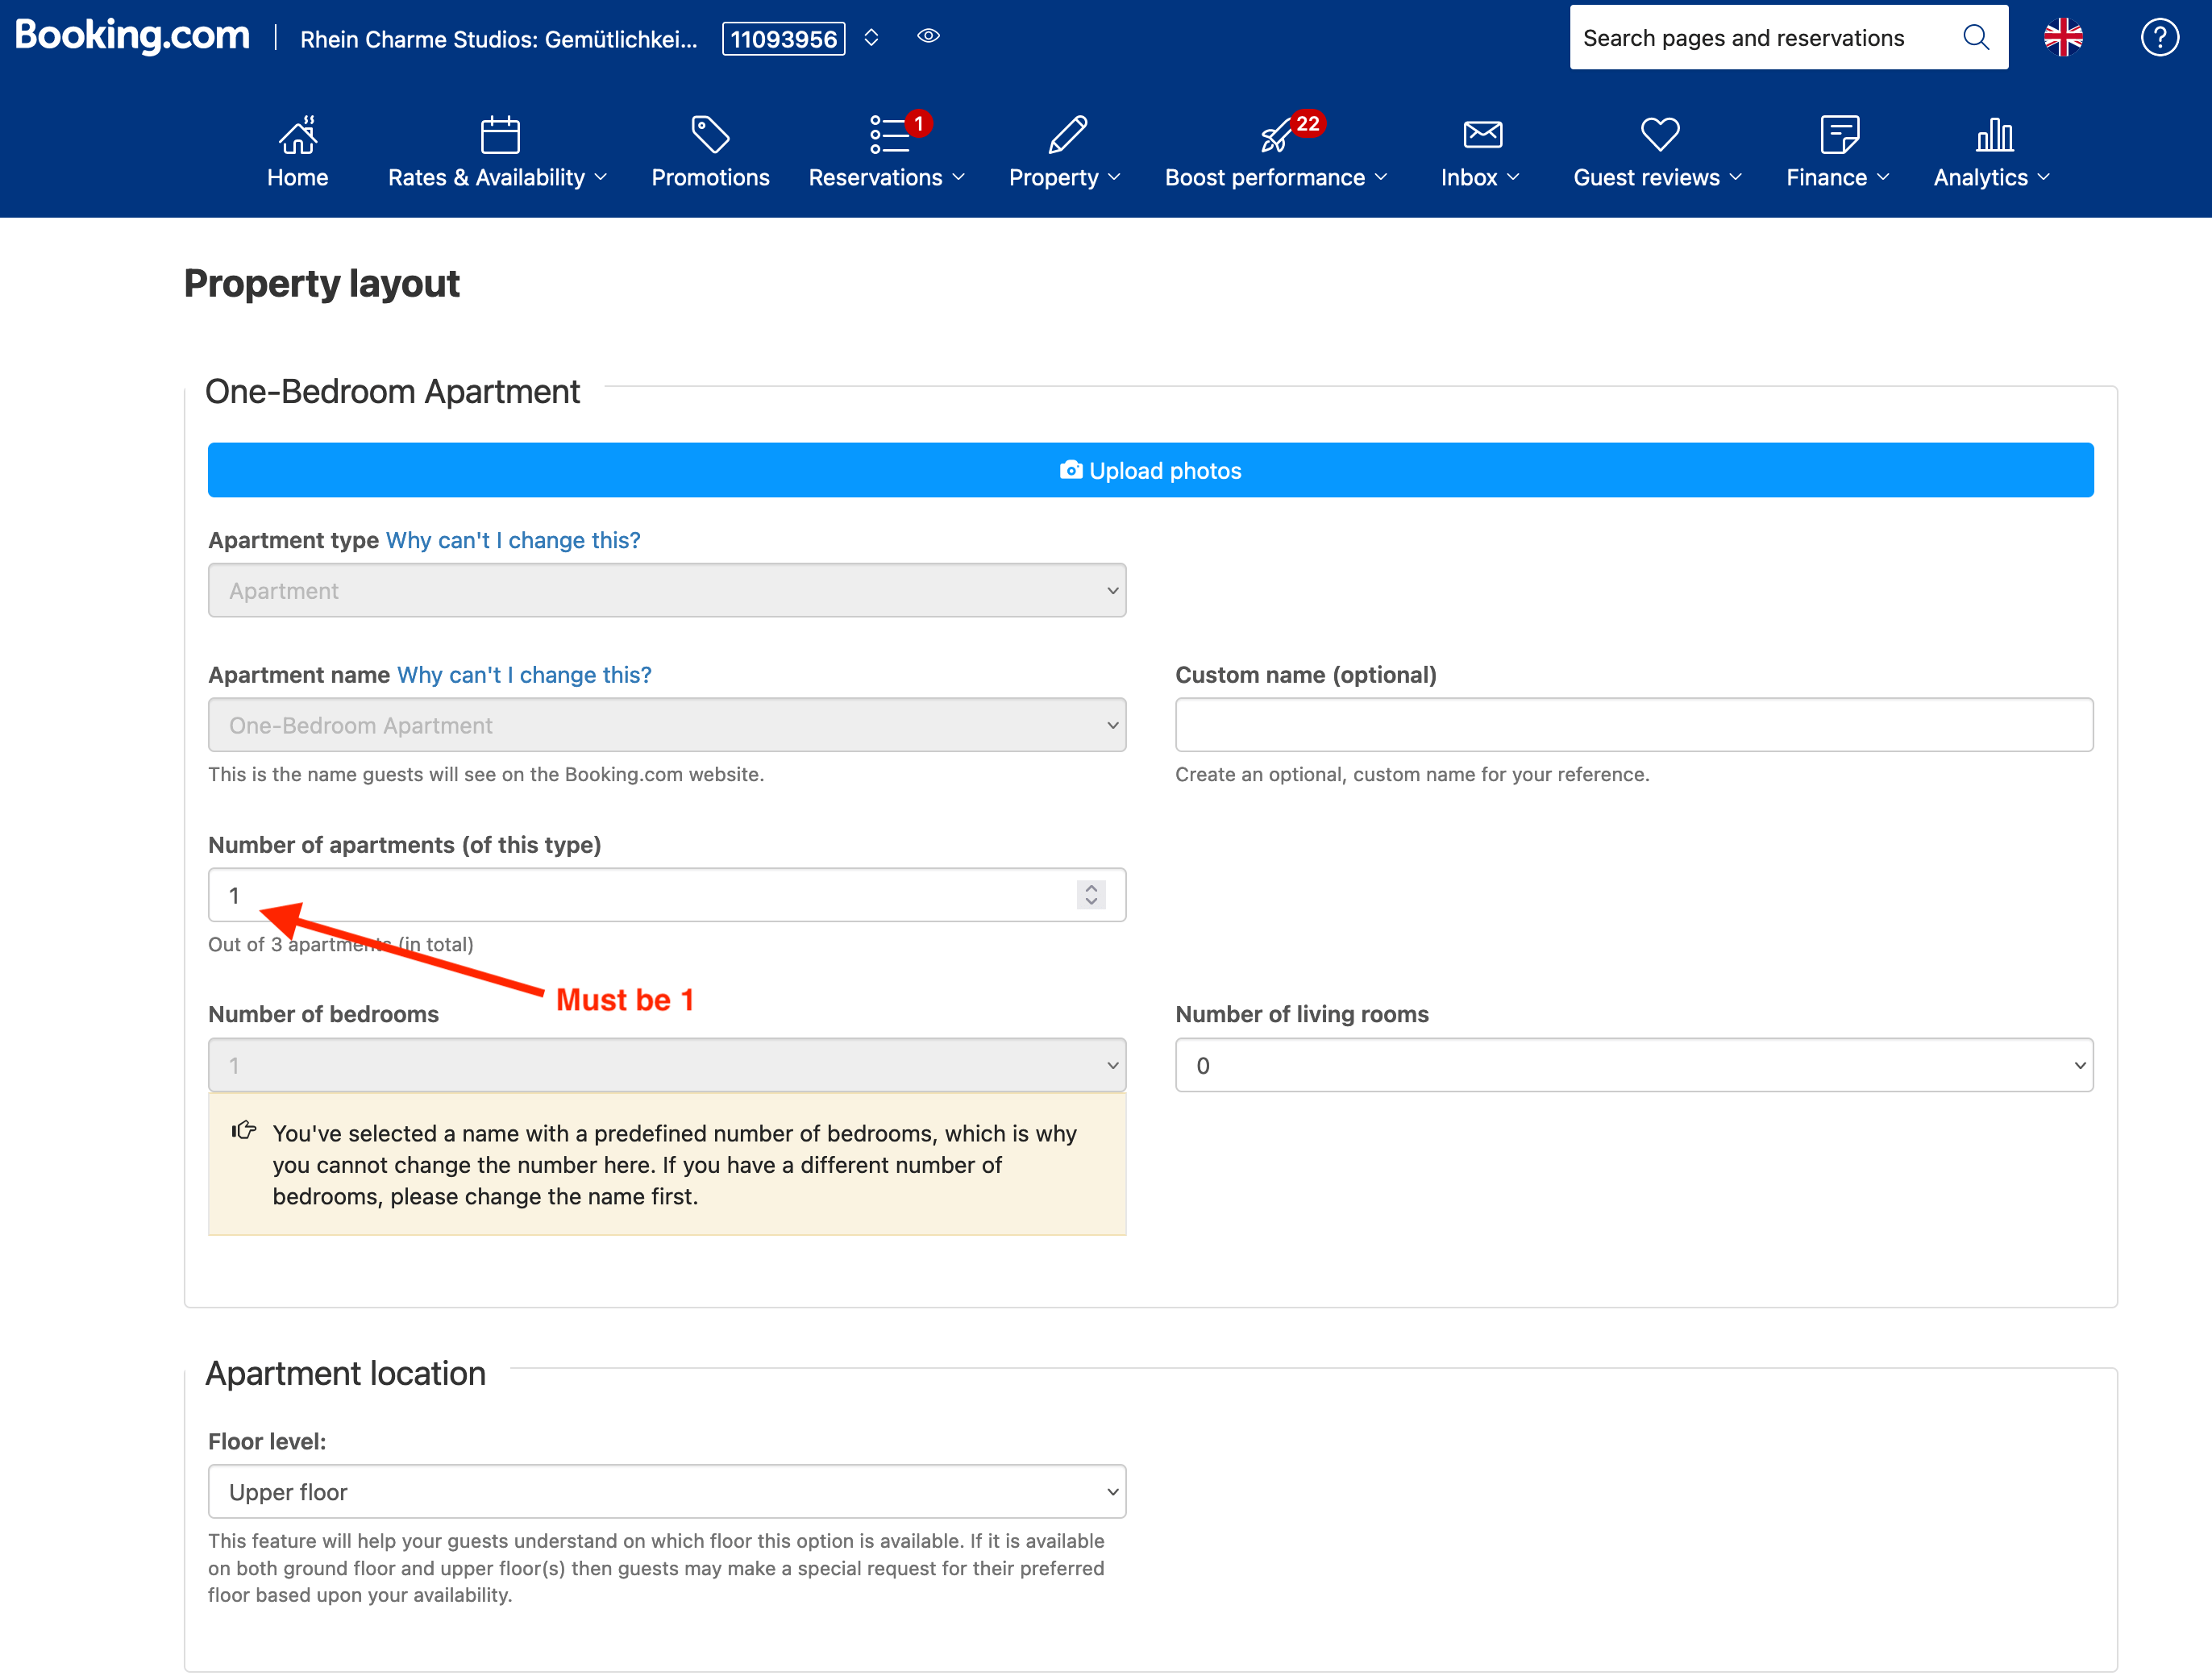 Correct setting adjustment in Booking.com's Property Layout menu for calendar sync